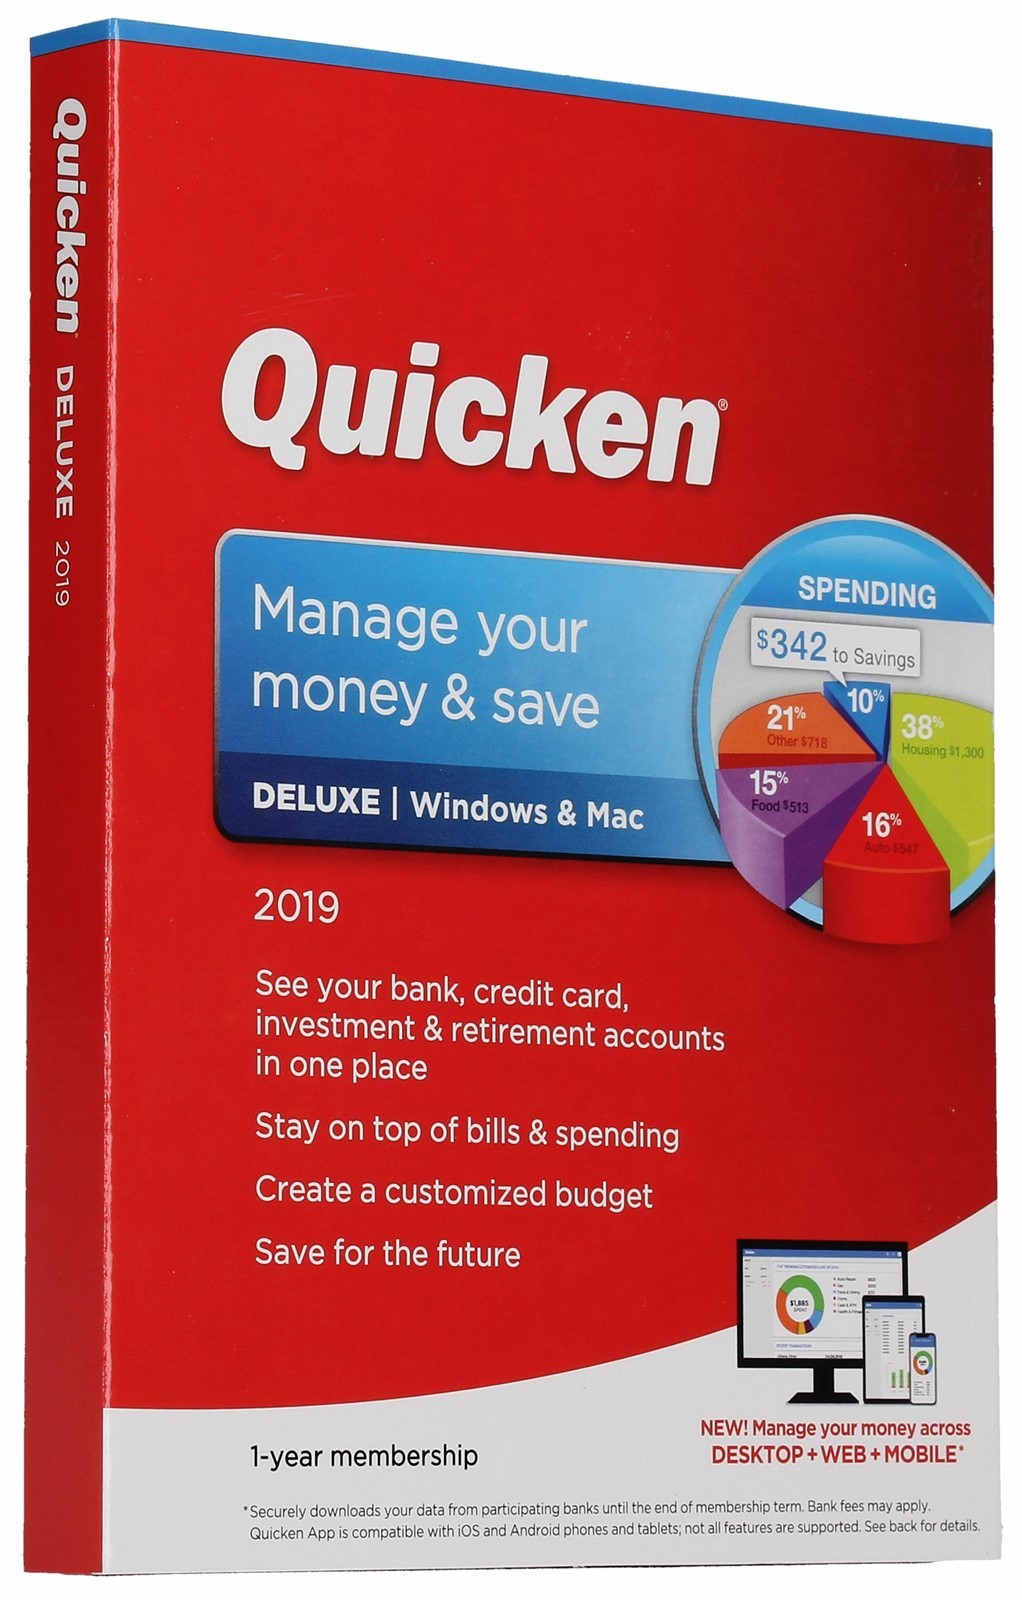 has anyone converted from quicken for windows to quicken for mac